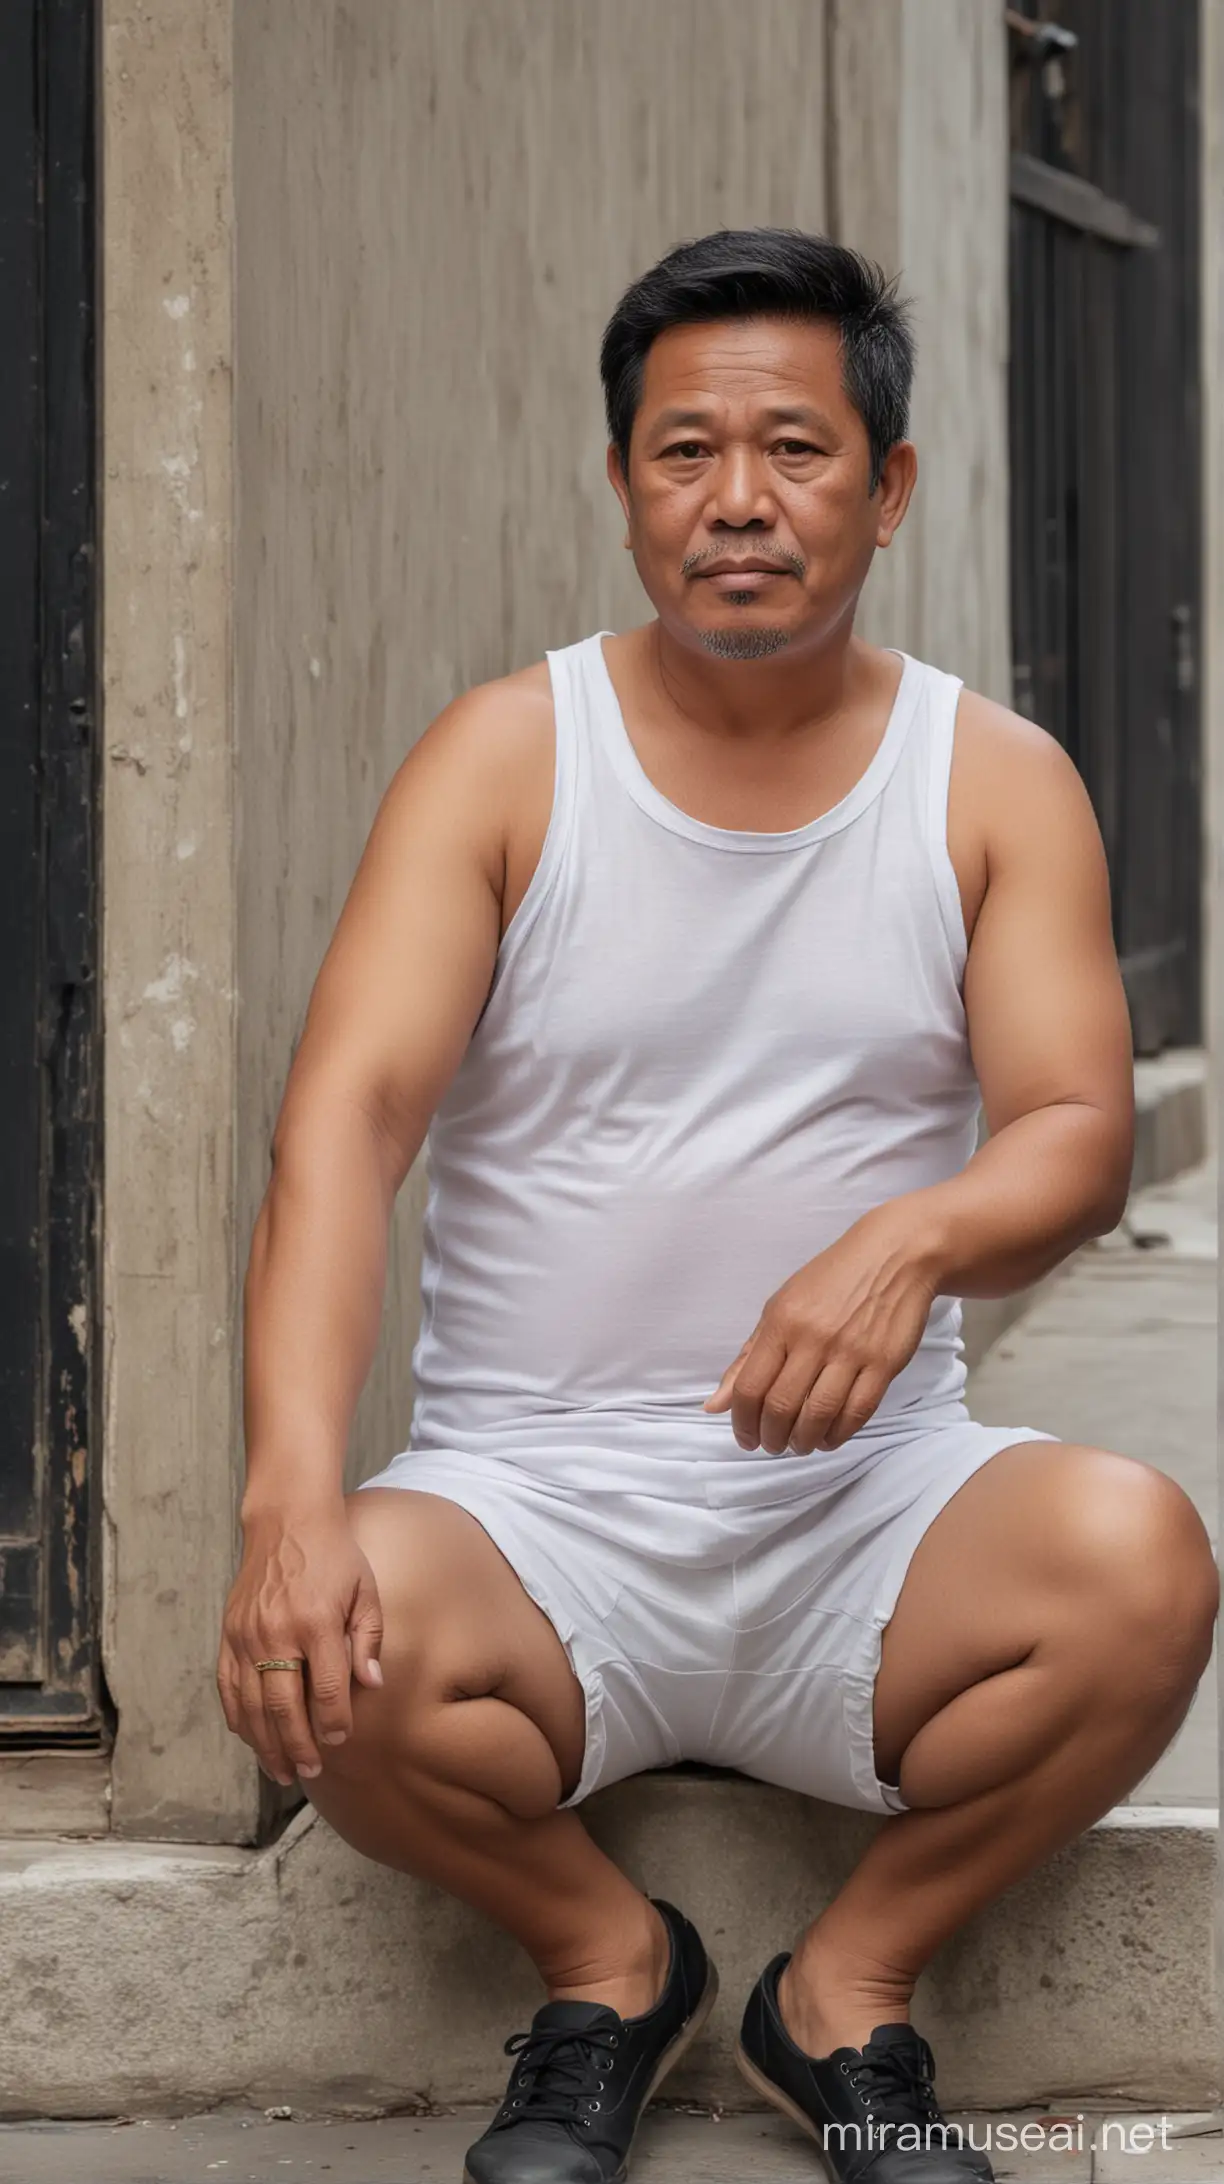 Chubby Indonesian Gentleman in White Tank Top Sitting on Deserted Street